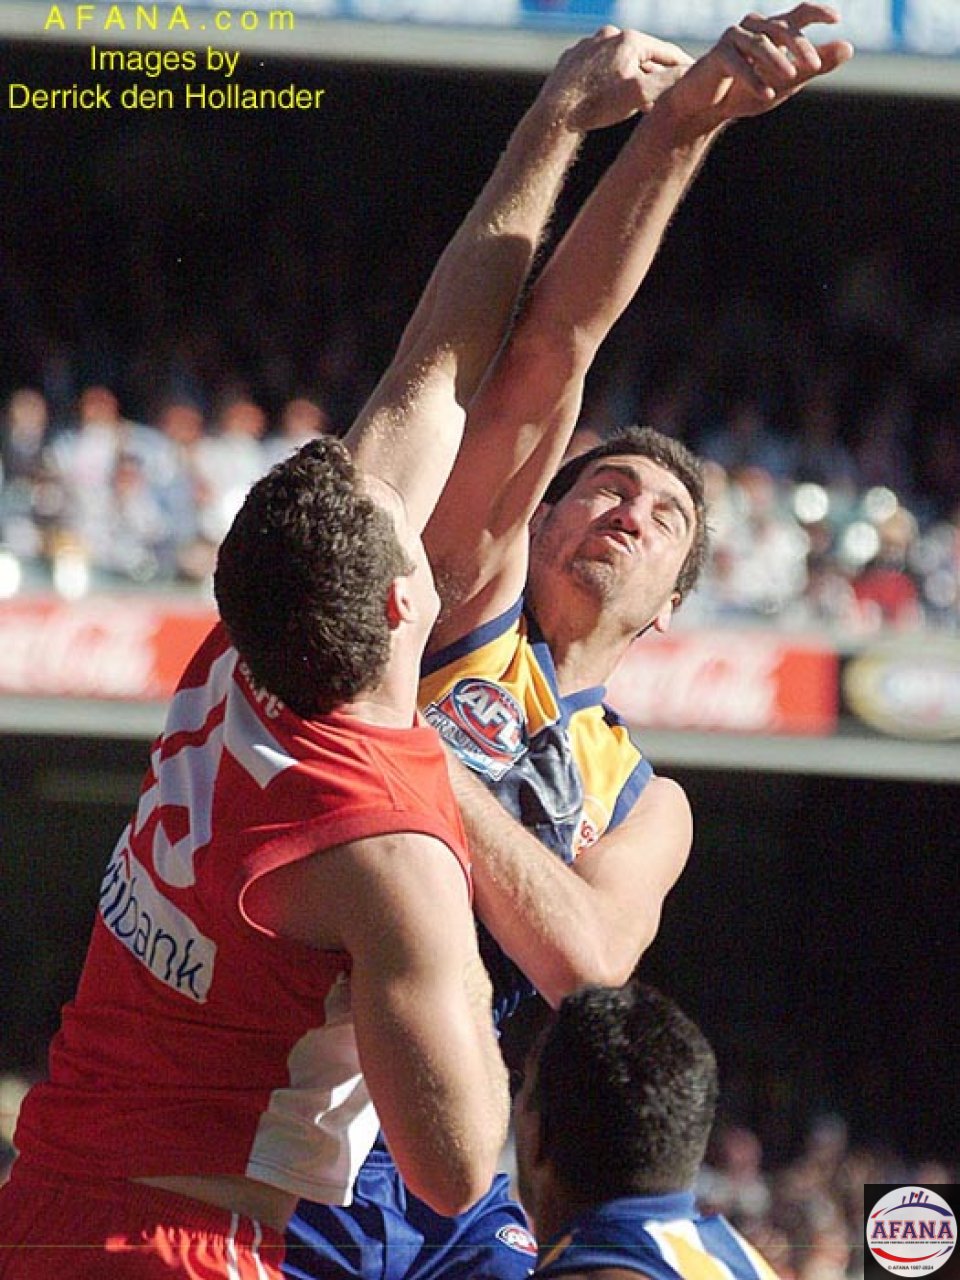 [b]The two giant ruckmen from both sides contest a boundary throw in[/b]